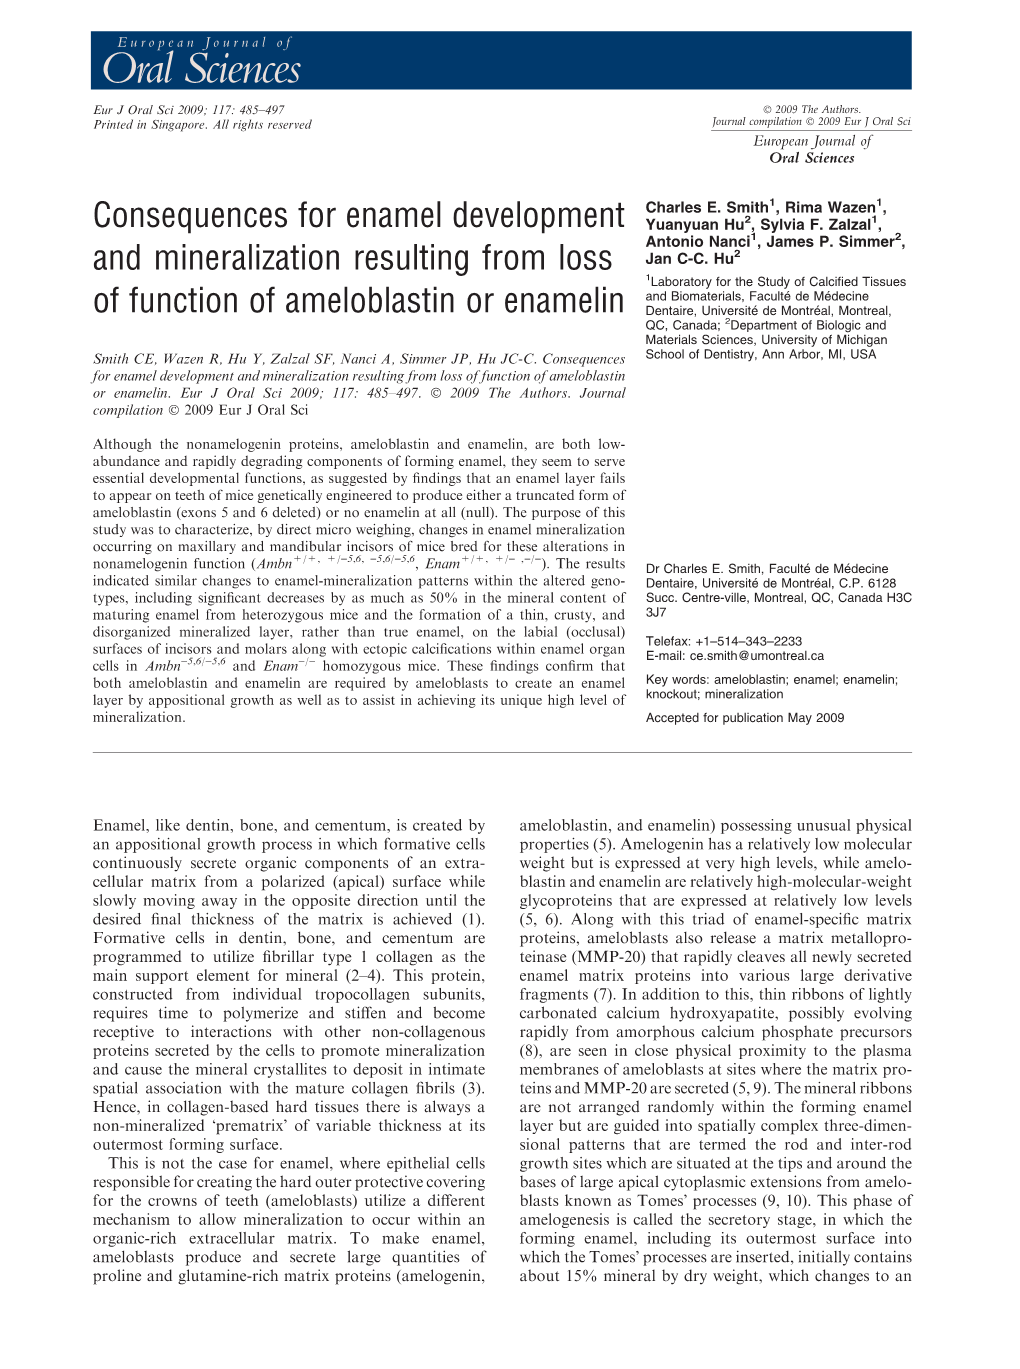 Consequences for Enamel Development and Mineralization